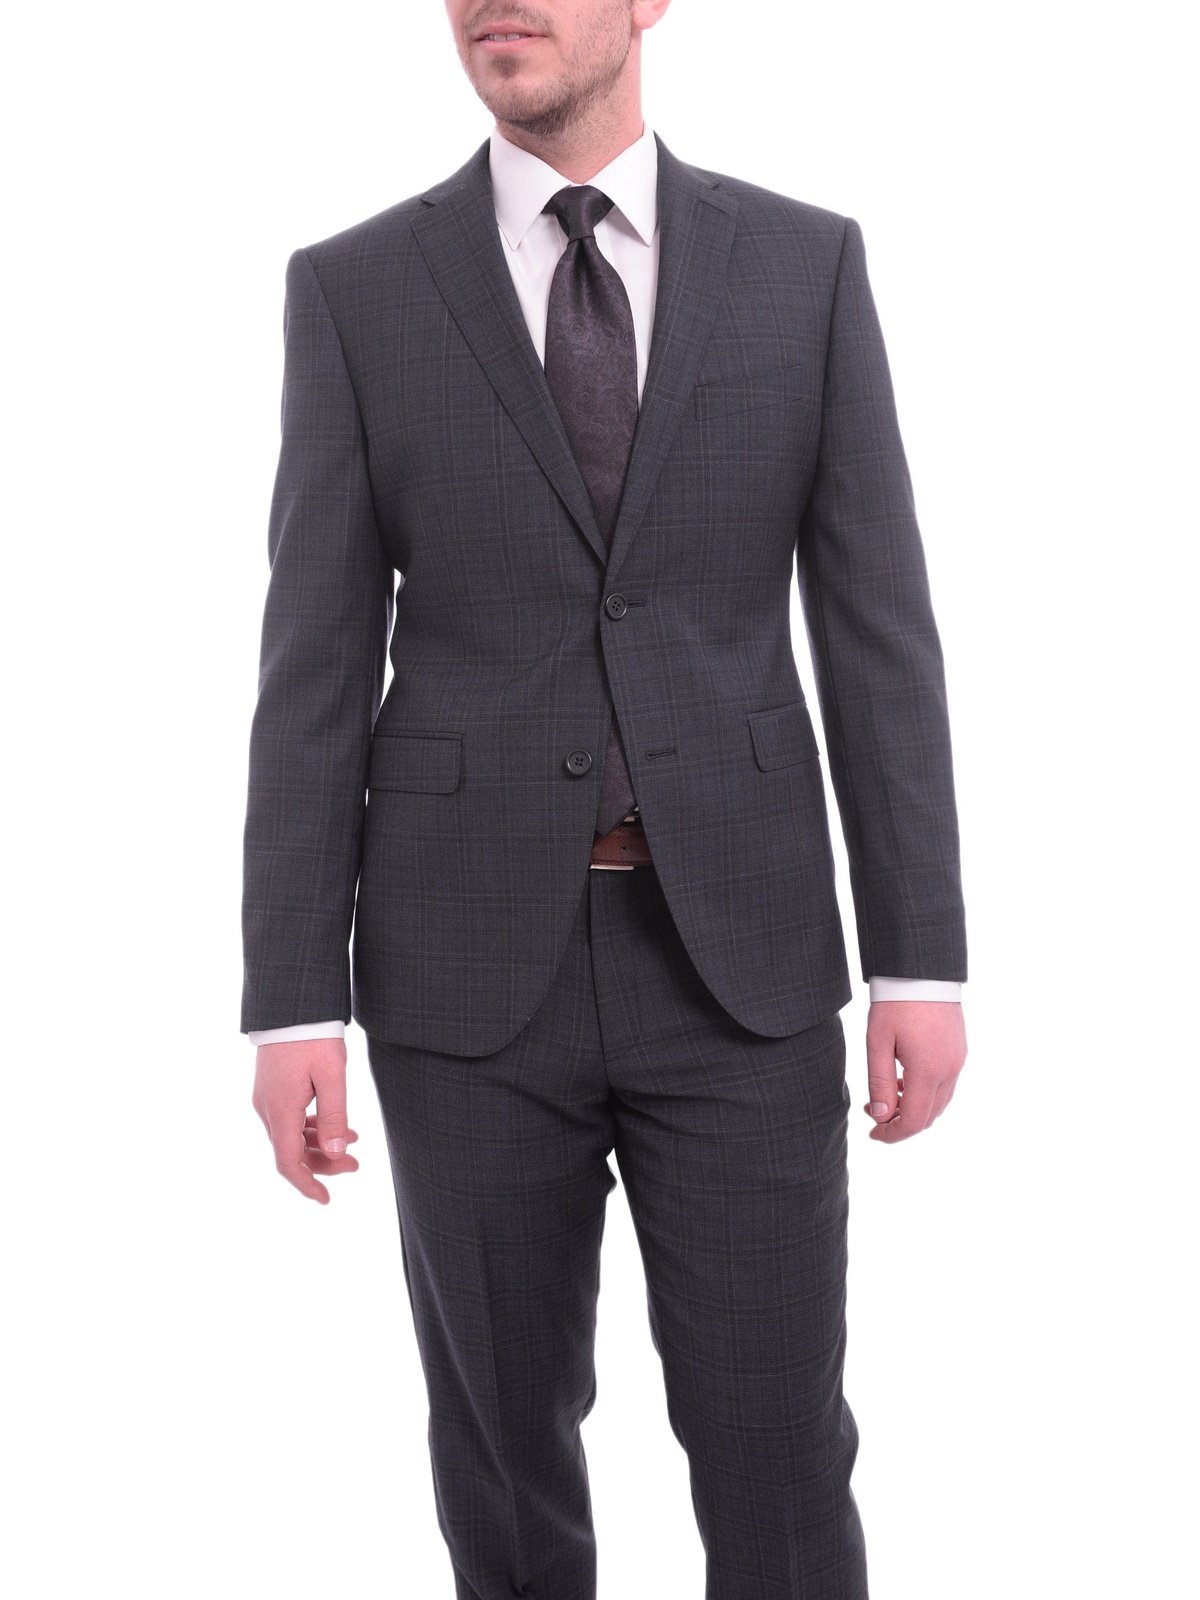 Zanetti Sale Suits Zanetti Slim Fit Navy With Subtle Purple Plaid Two Button Wool Suit